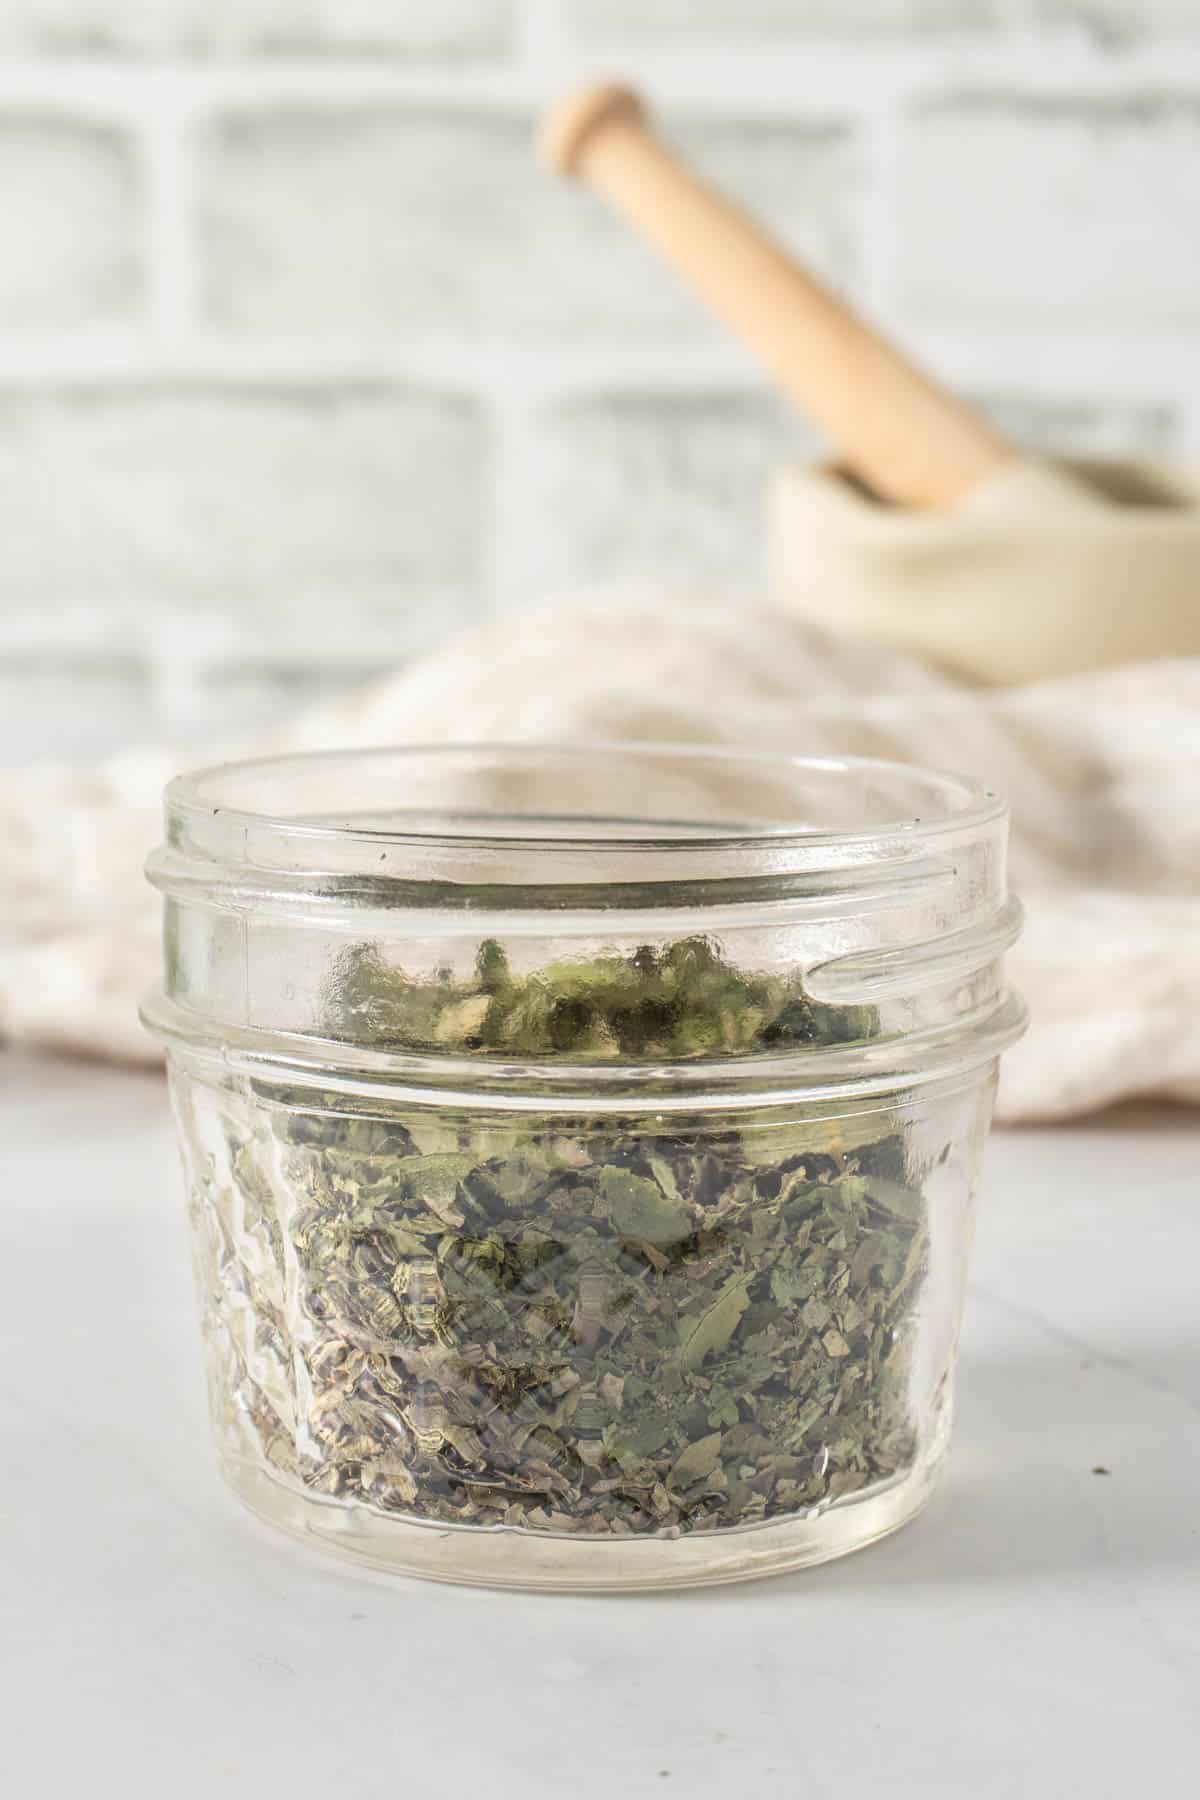 Dried basil in small jar, mortar and pestle in the background